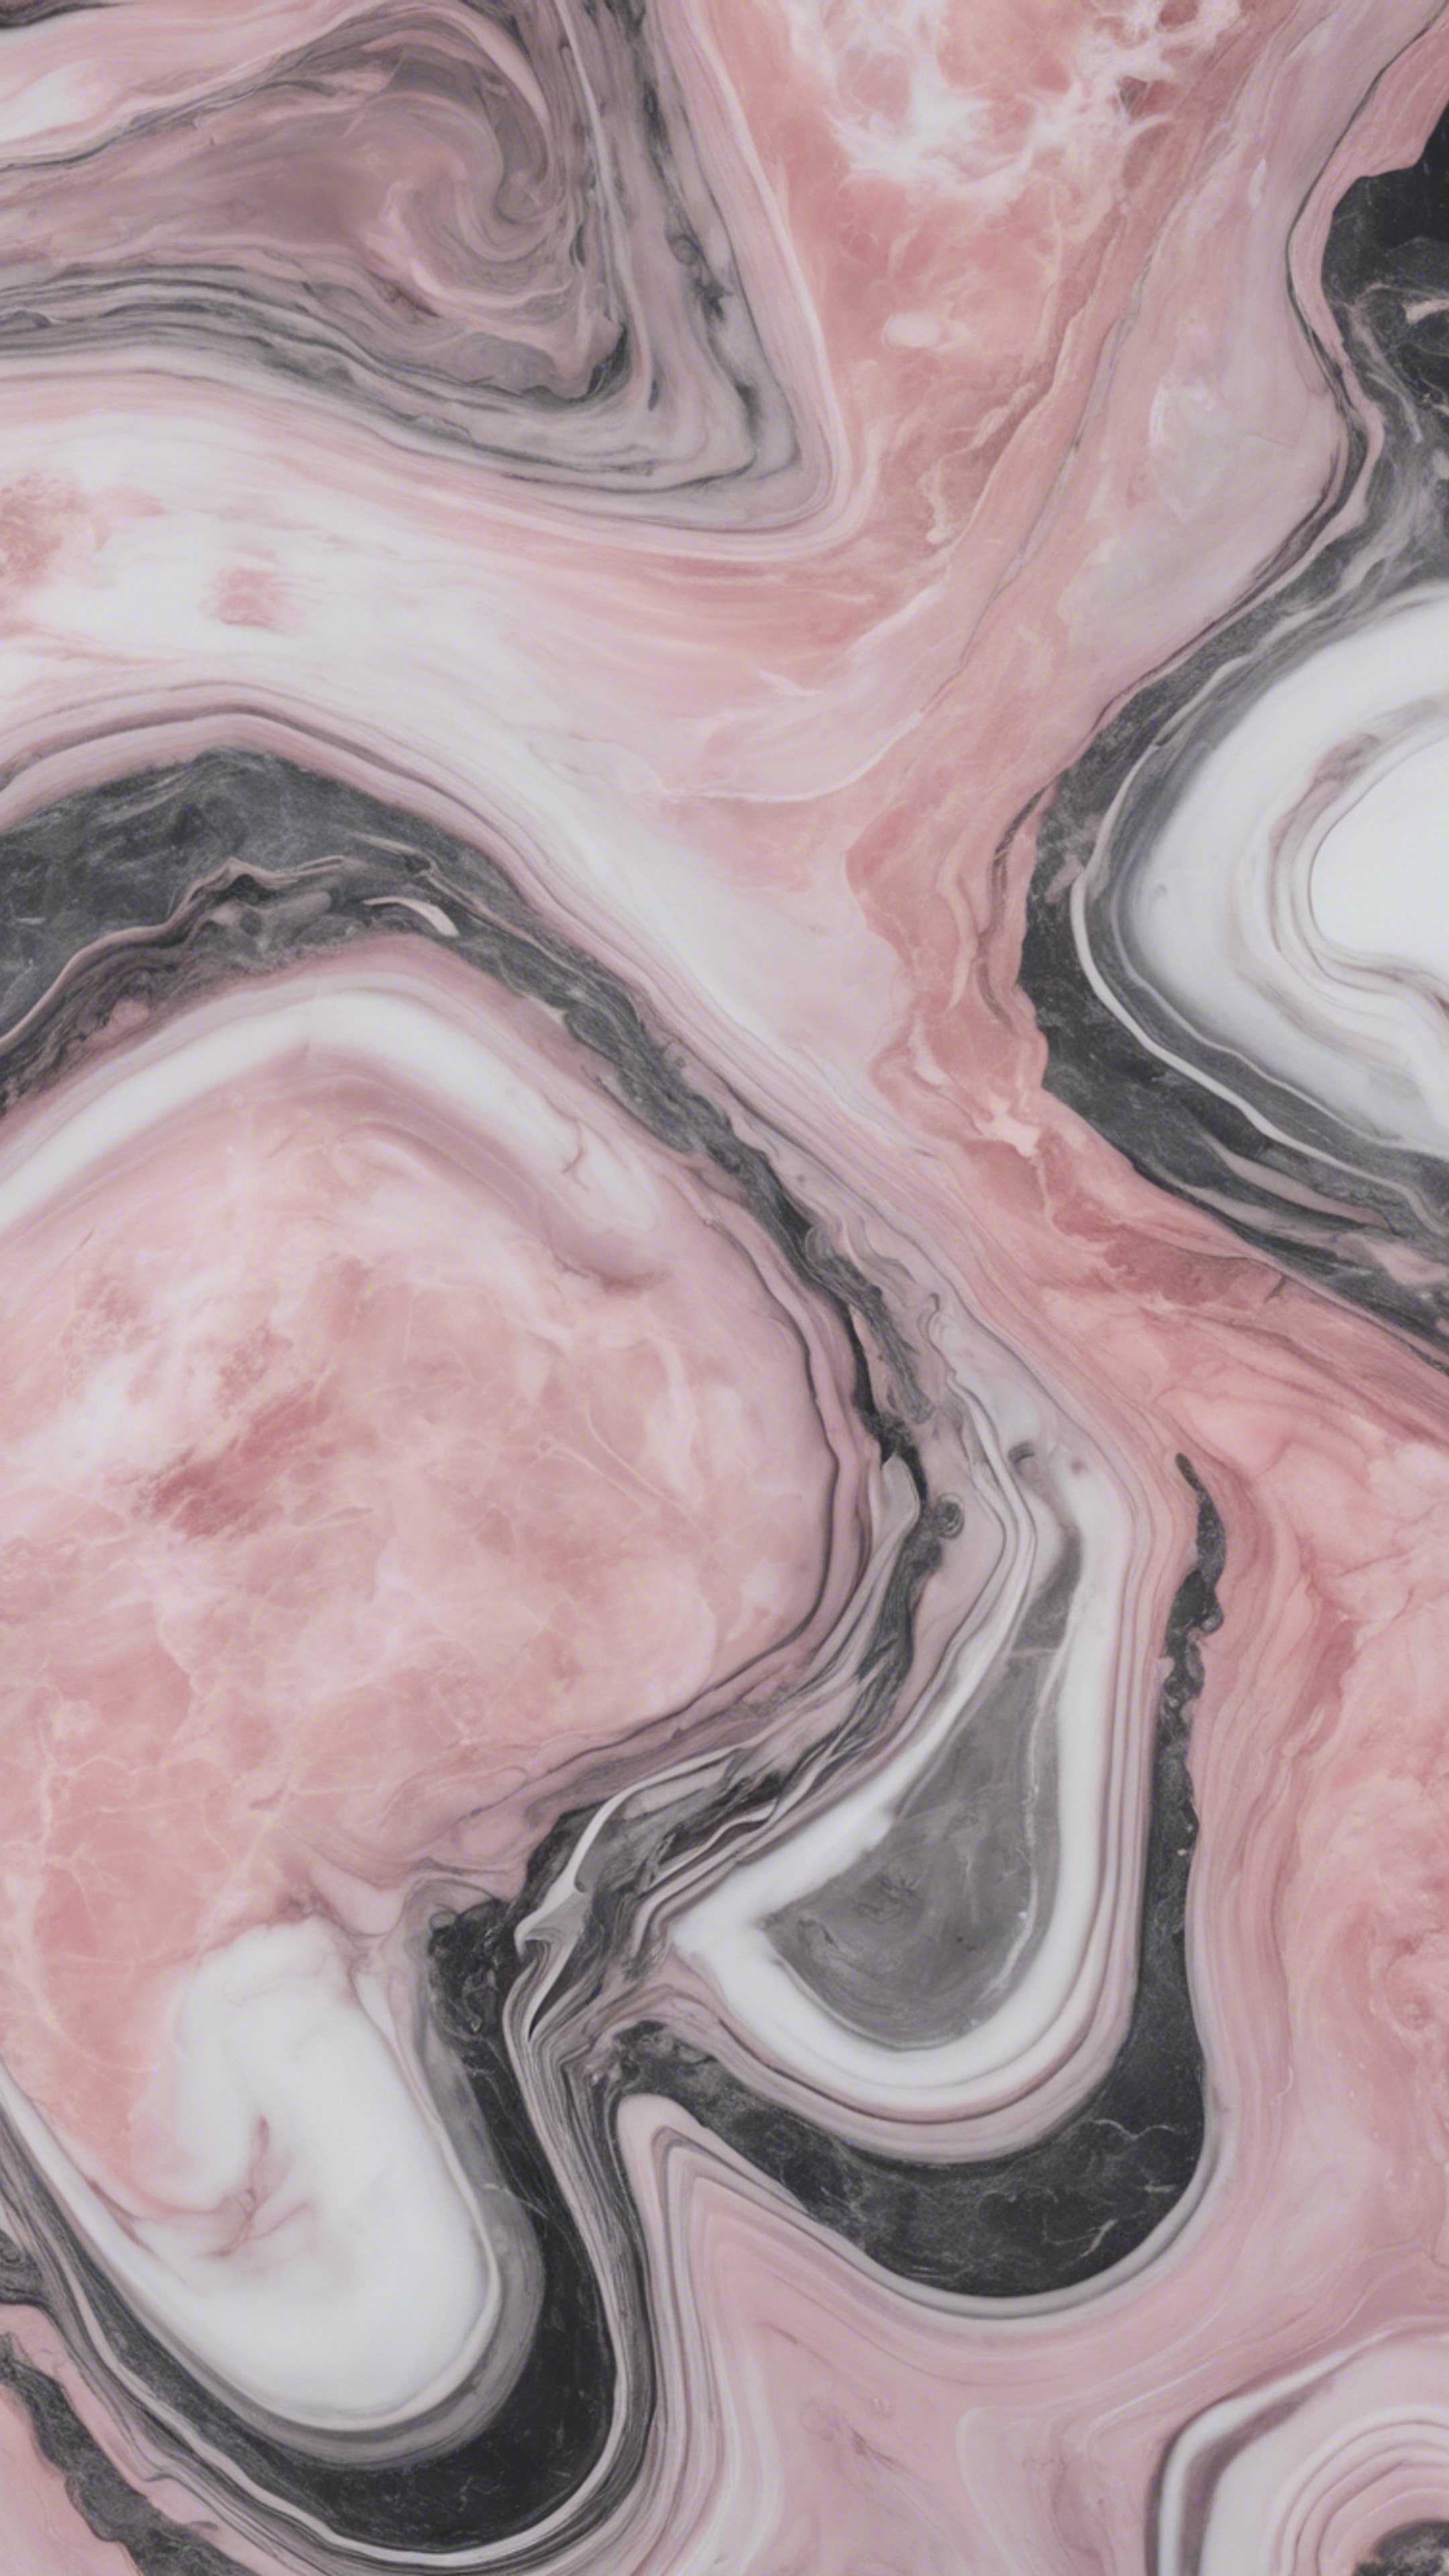 A swirling pattern of pink, white, and charcoal grey characteristic of polished pink marble. Tapeta[fb90daec103040ffbaff]